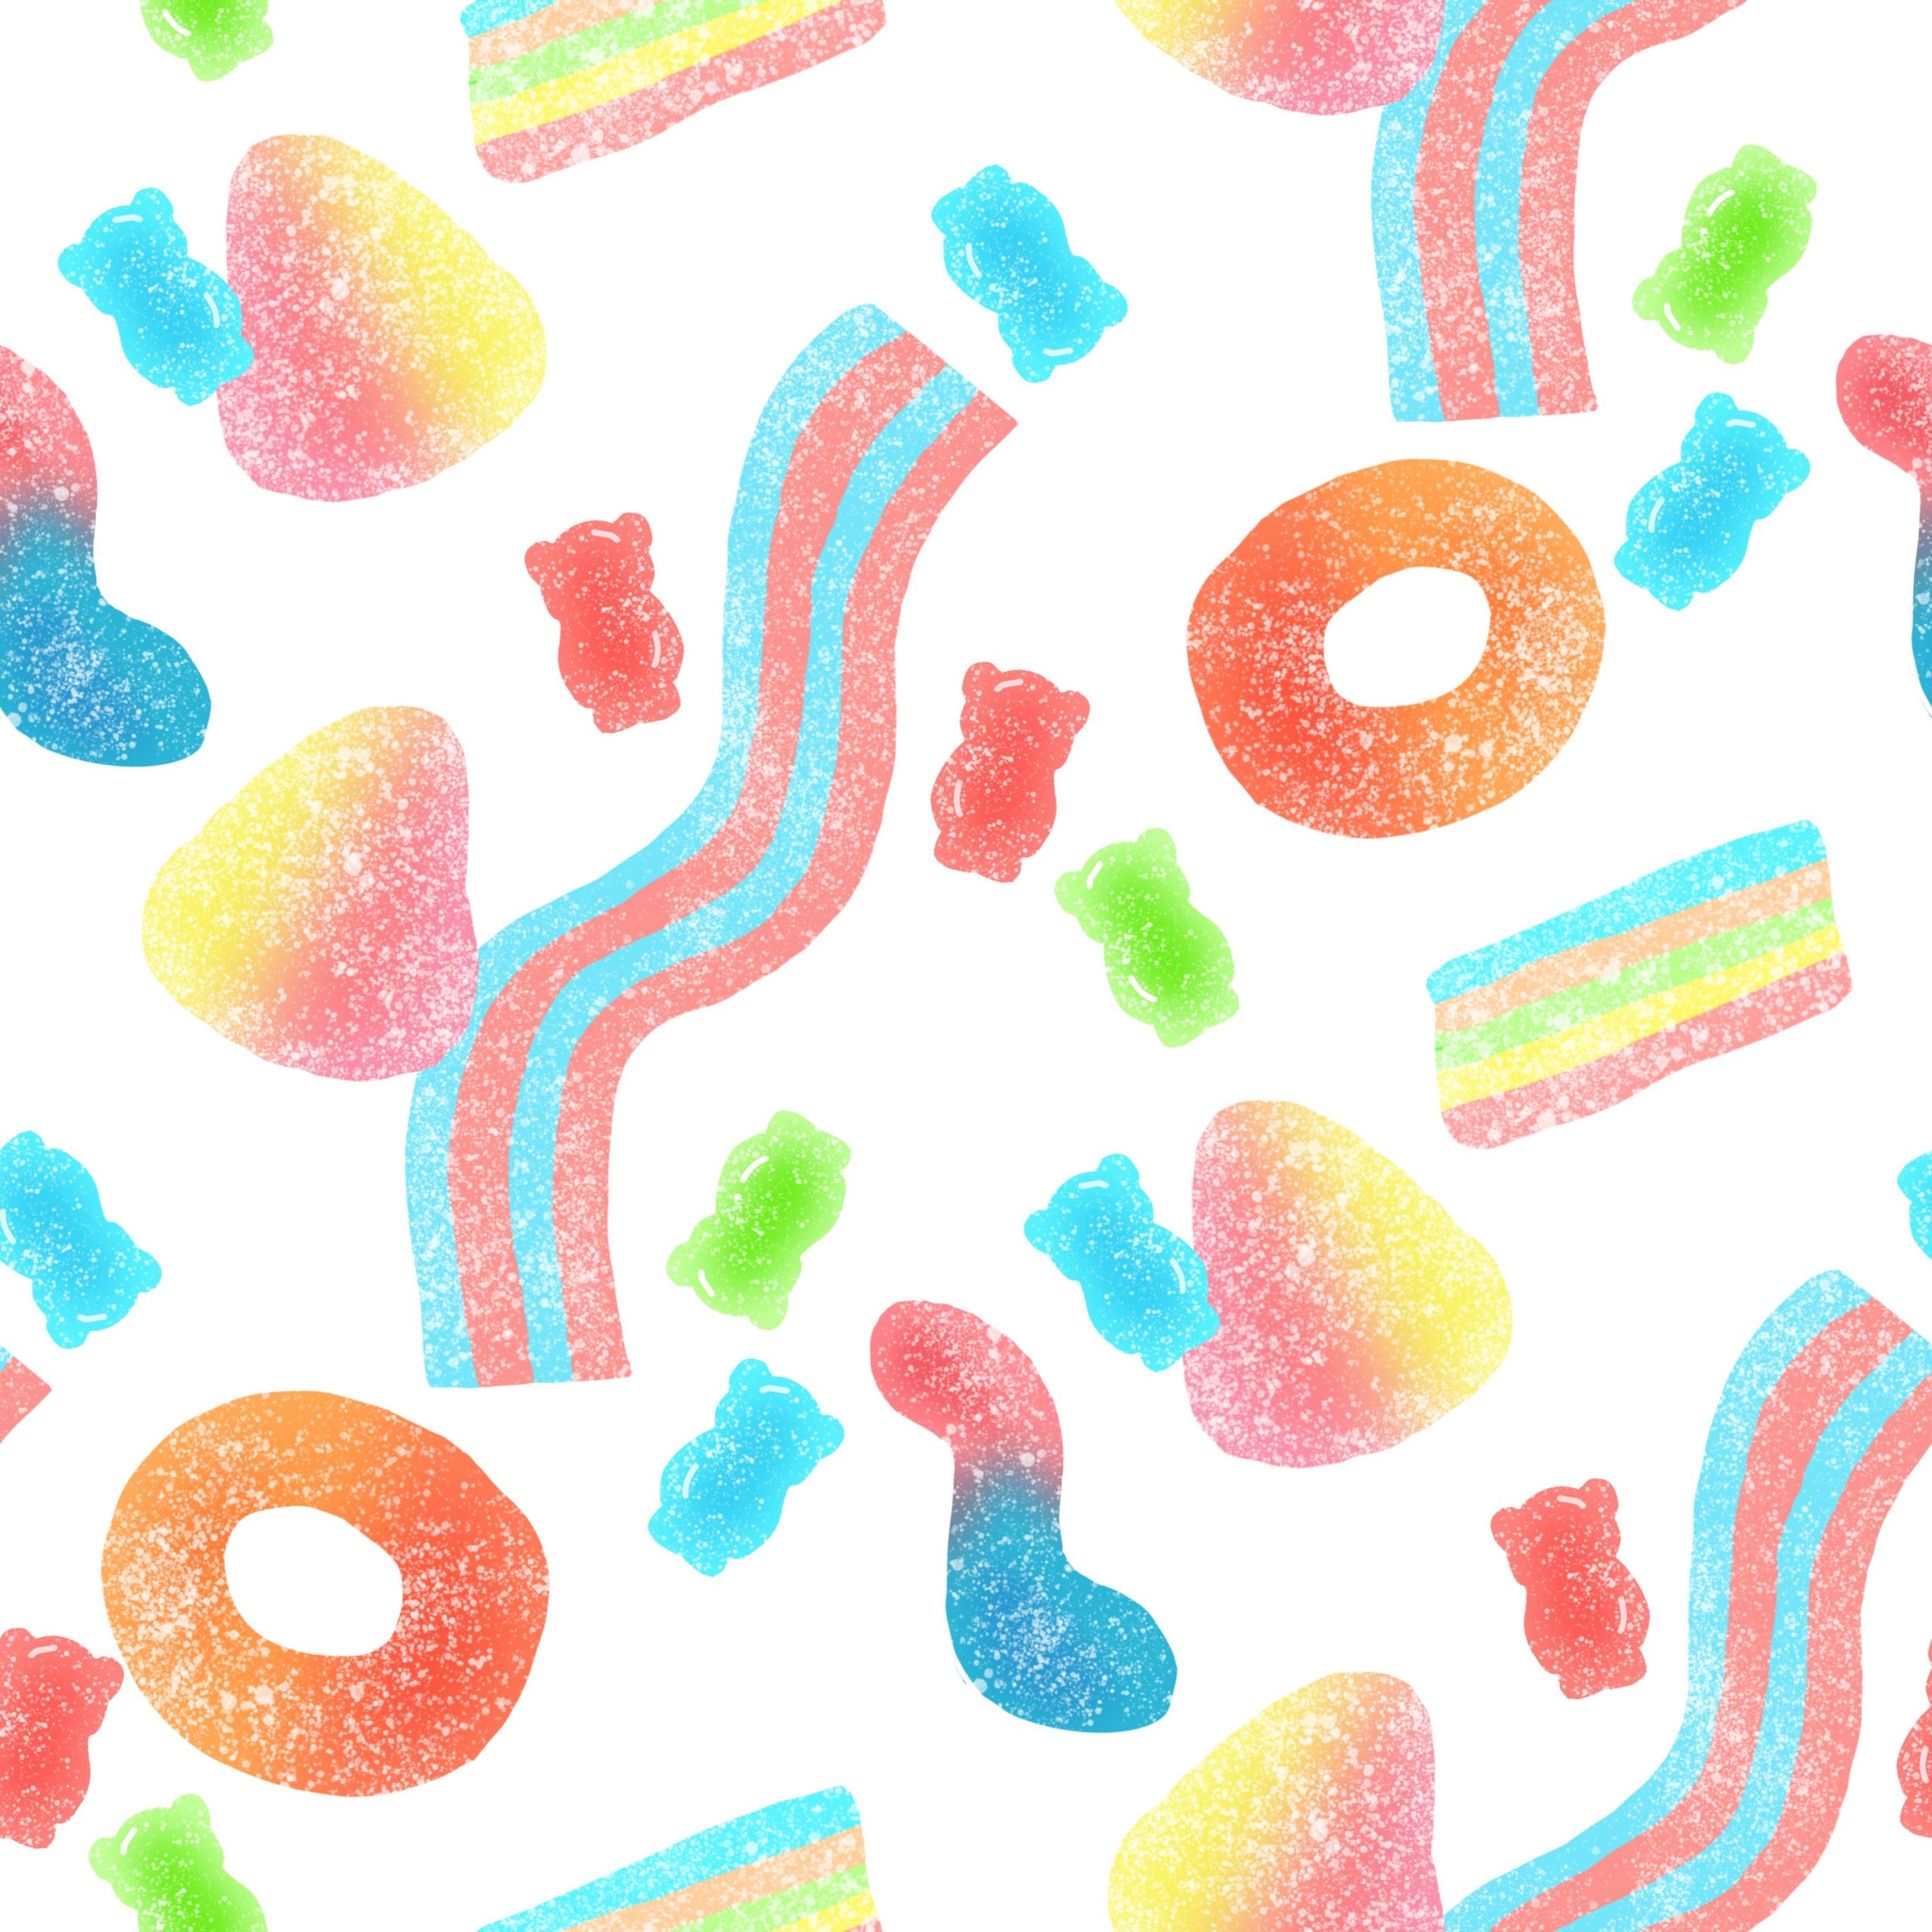 illustrated sour candy scattered across a white background